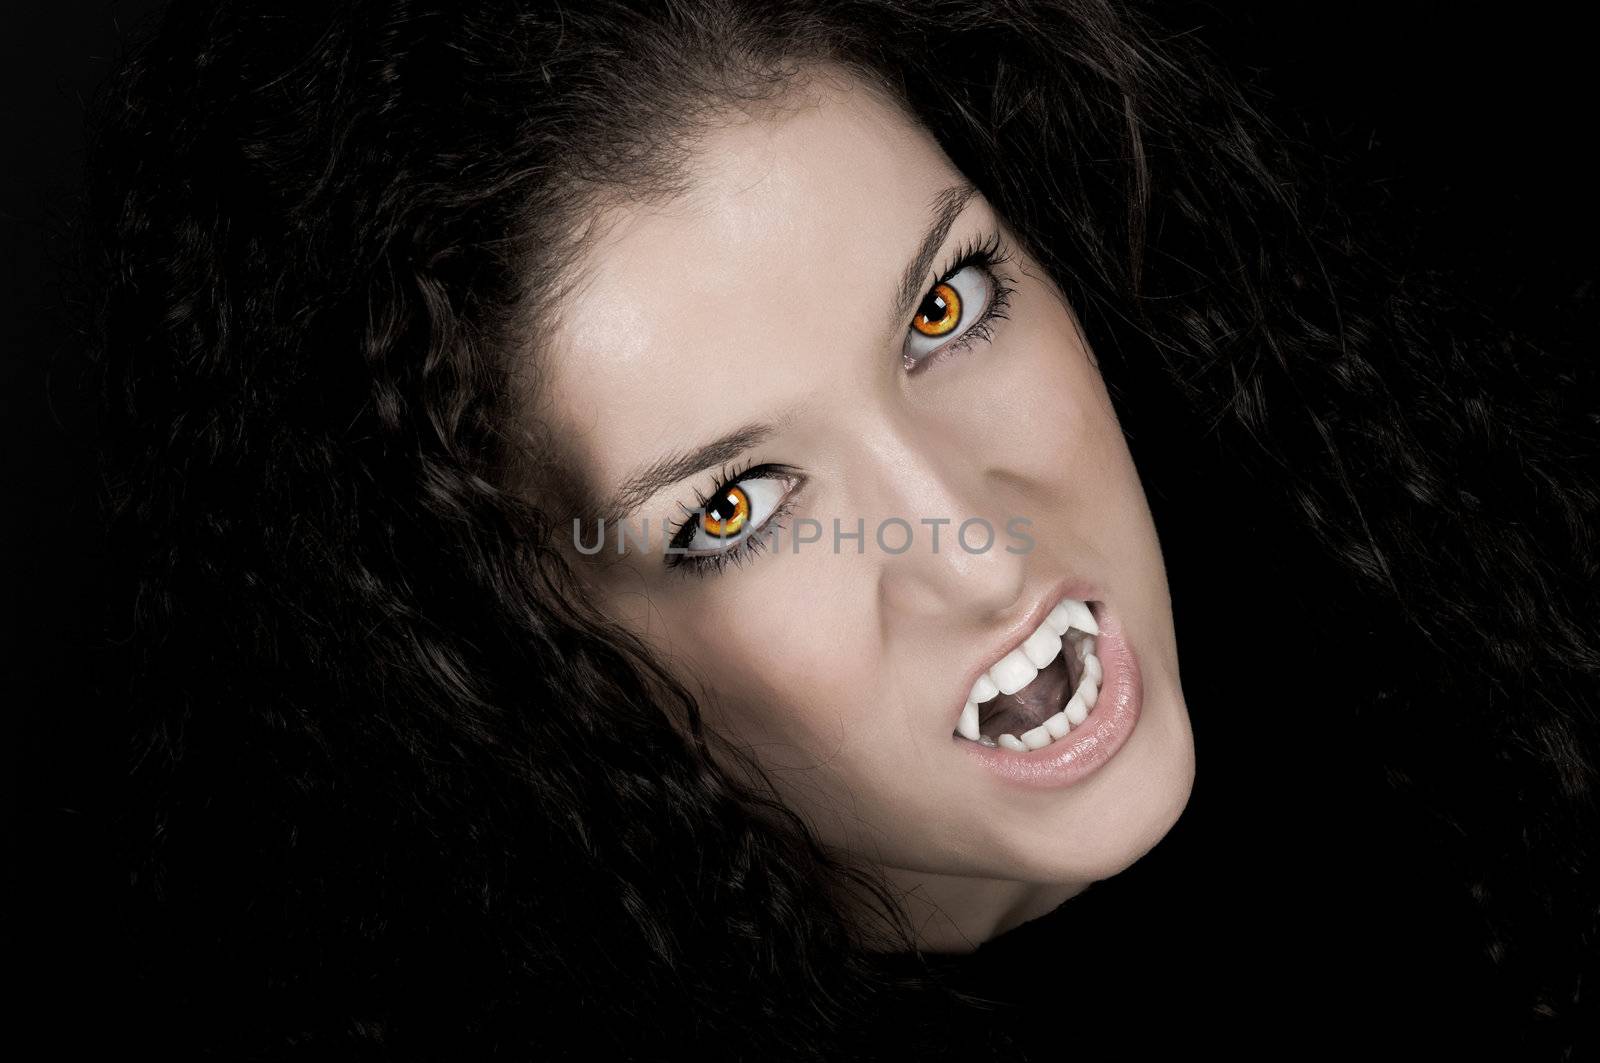 Vampire with pale face, fangs, and scary eyes